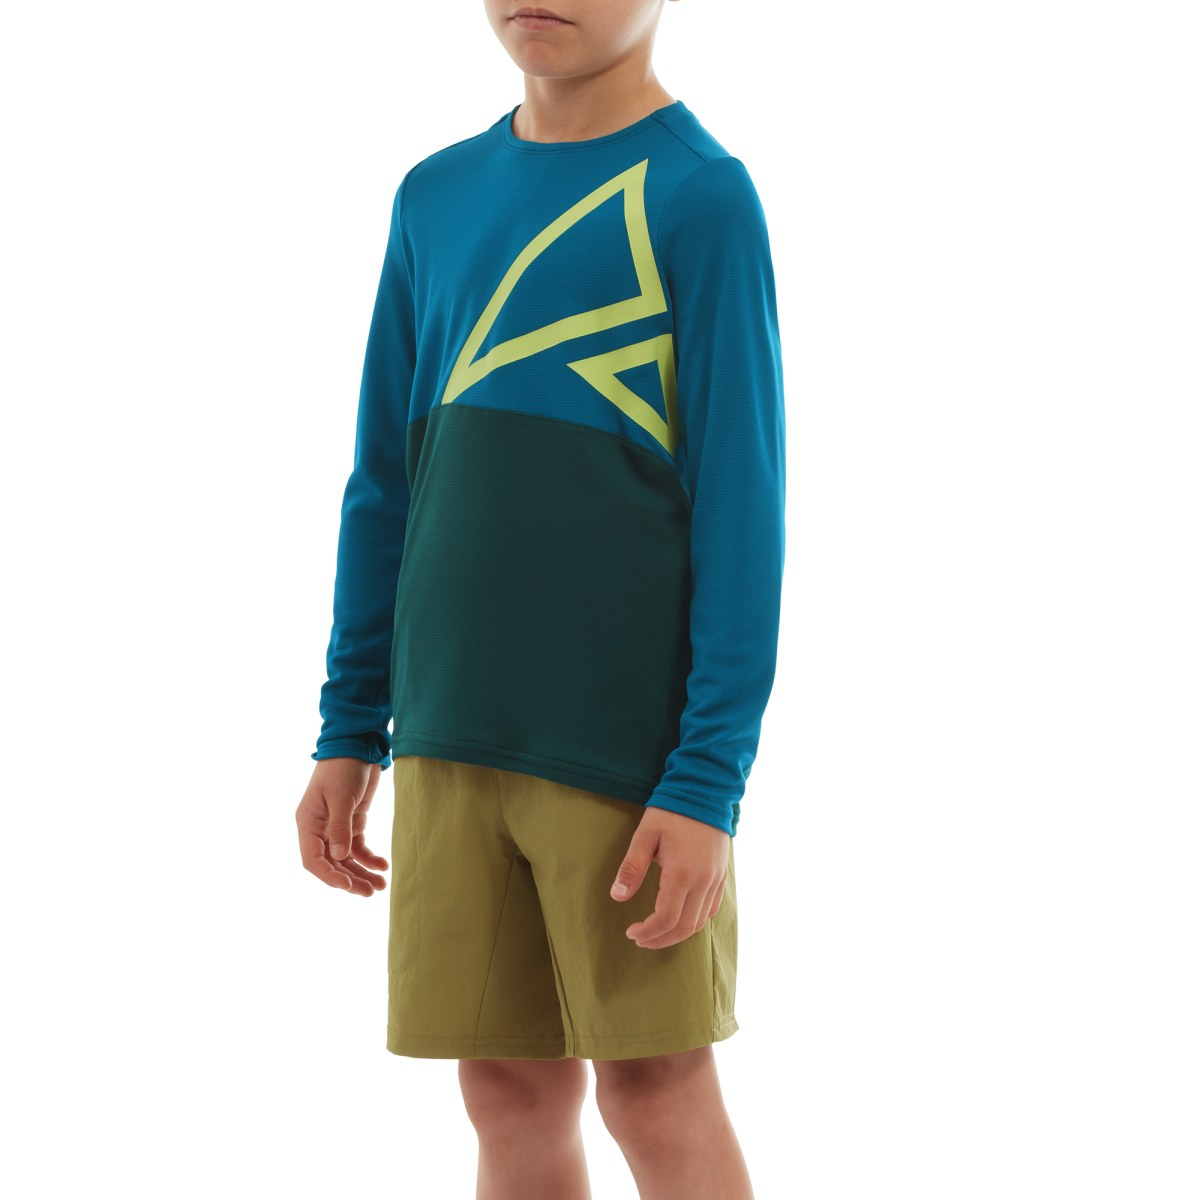 Altura  Spark Lightweight Kids Long Sleeve Jersey 5 to 6 Years BLUE/TEAL